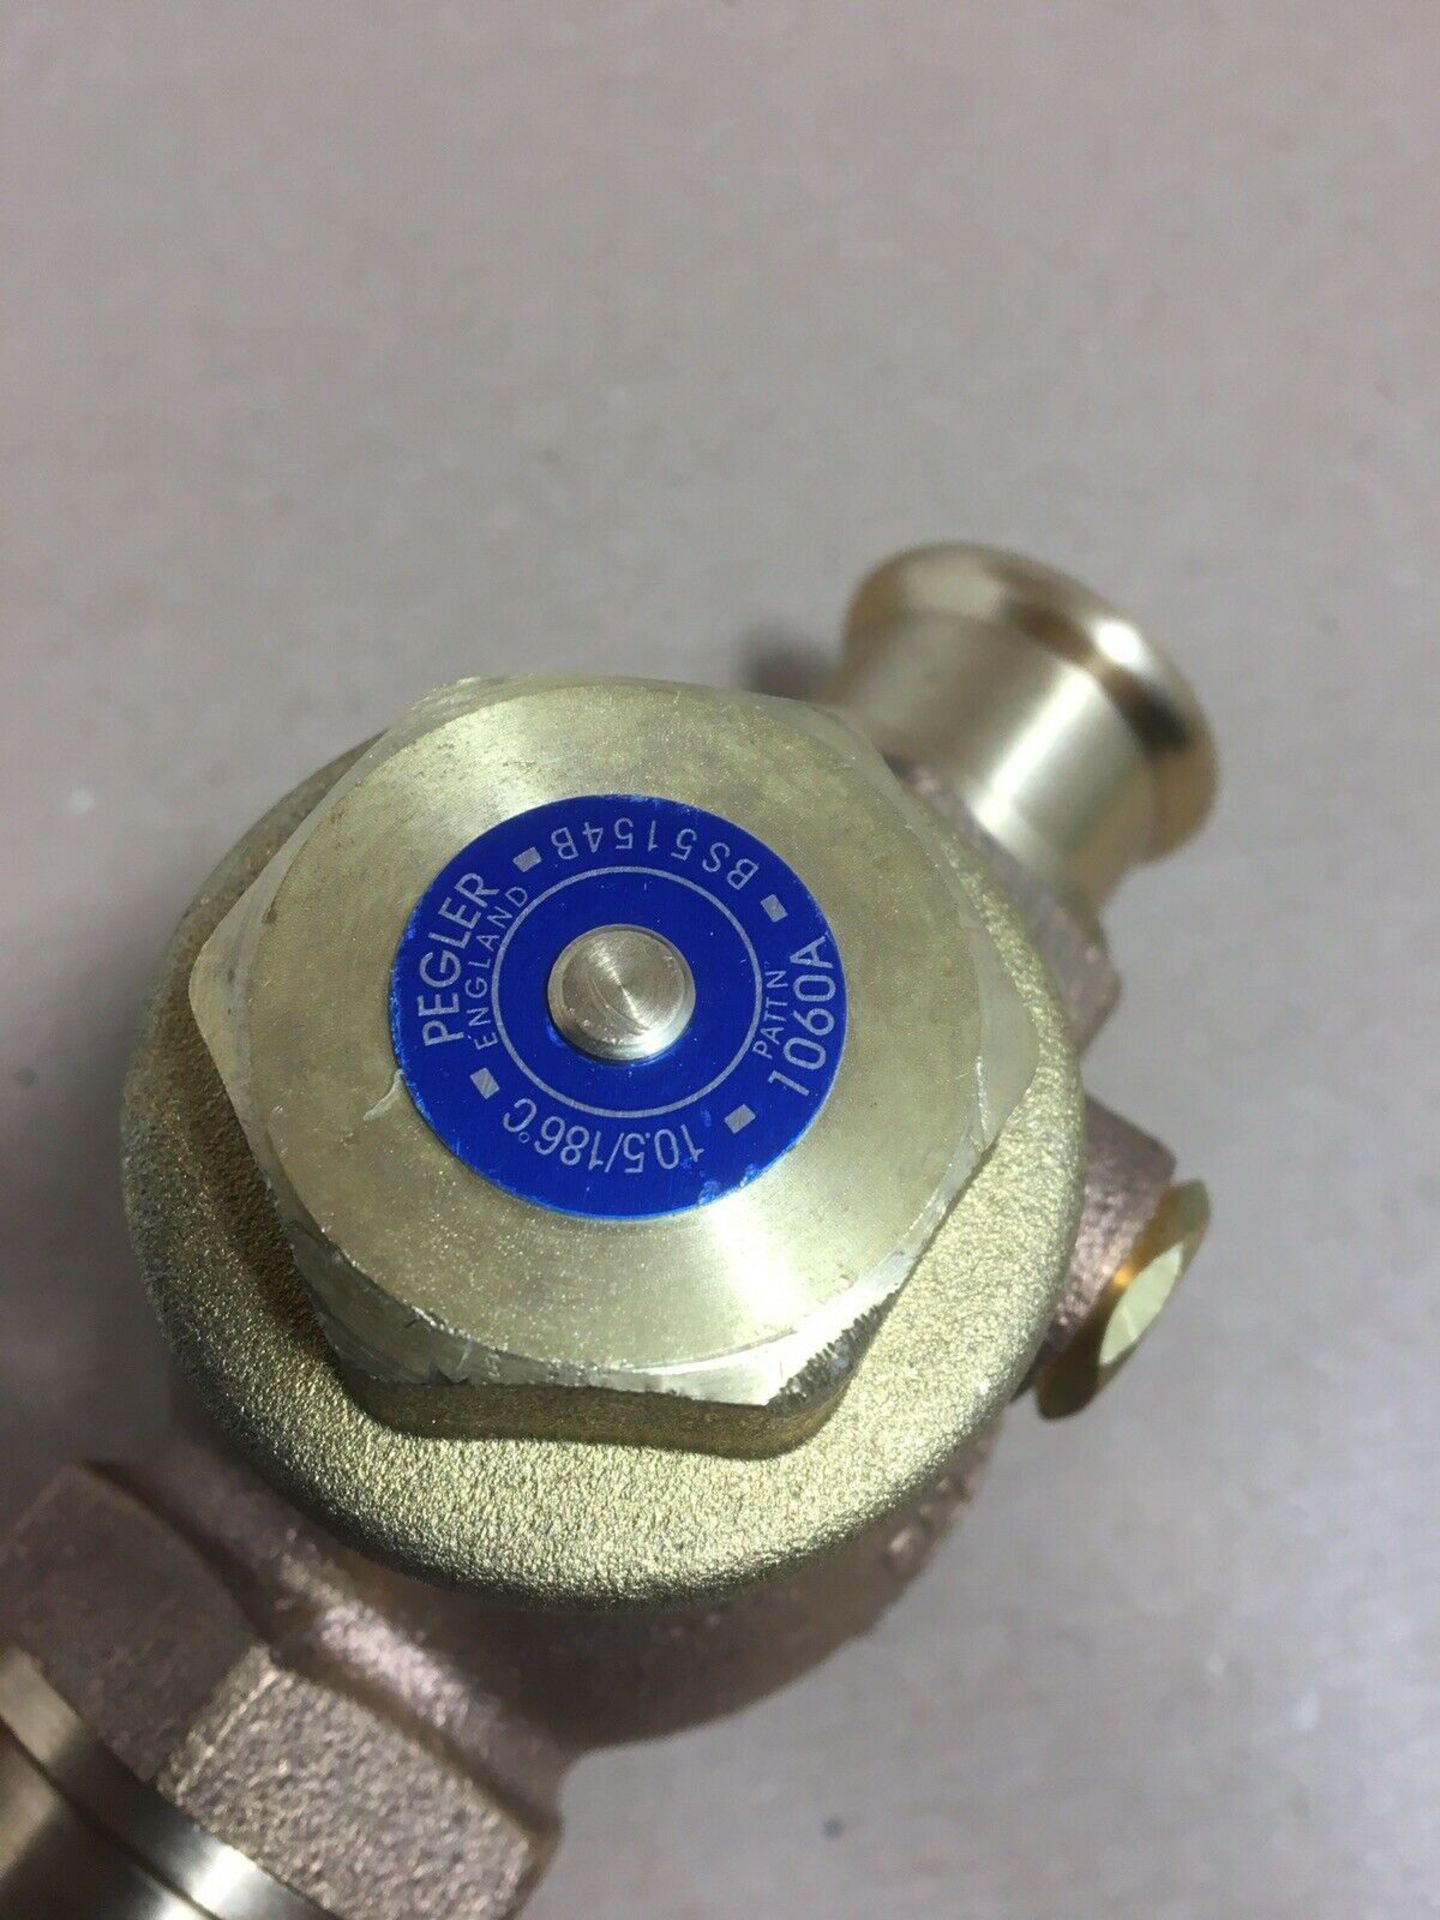 3 x Pegler PS1060A Press-fit Swing Check Valve, XPress Ends For Steel Tube - Image 3 of 5